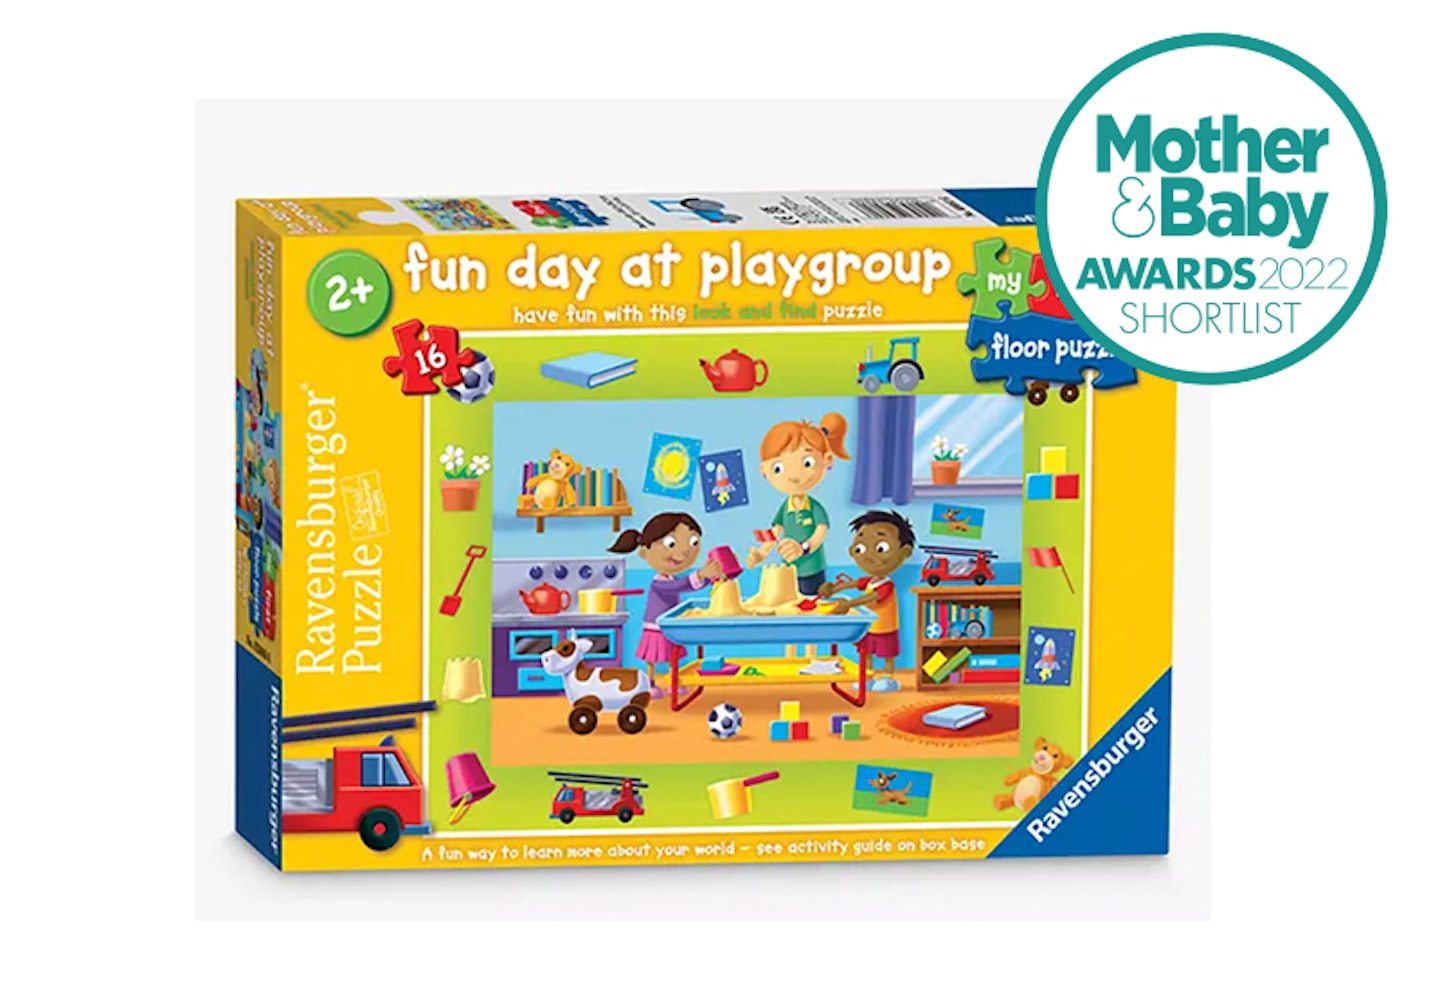 Ravensburger Come Play With Me Preschool Game Near Complete No